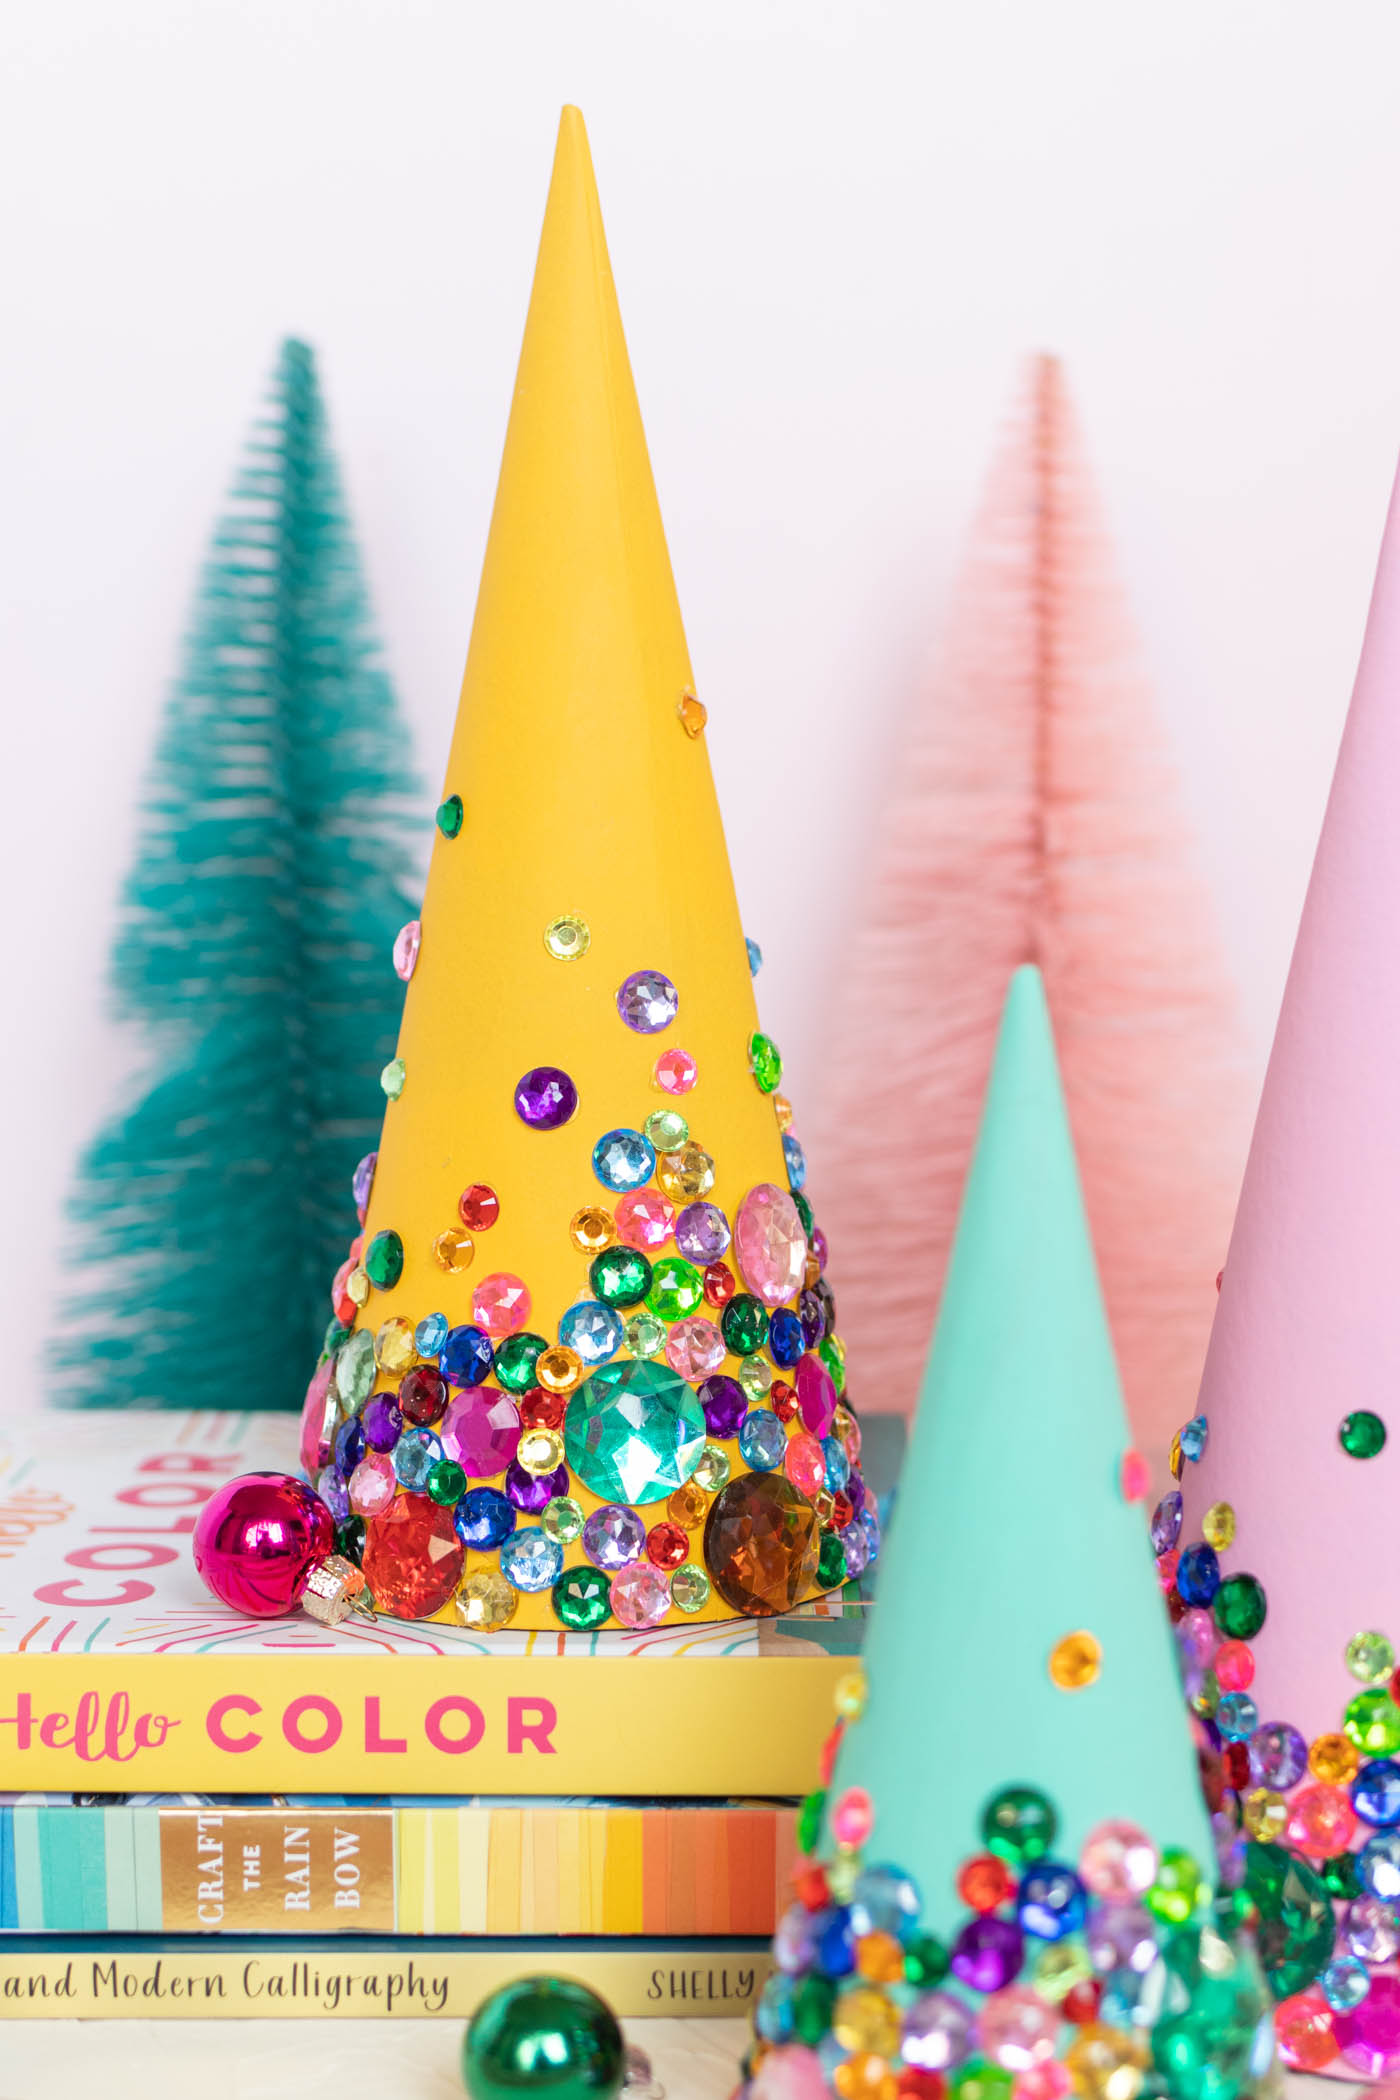 DIY Colorful Rhinestone Tree Decorations // Decorate mache cones with colorful paint and rhinestones to make sparkly tree decorations! These easy DIY Christmas trees make great mantel decor or shelf accessories for the holiday season! #christmasdiy #christmas #christmasdecor #painting #rhinestones #holidaydecor